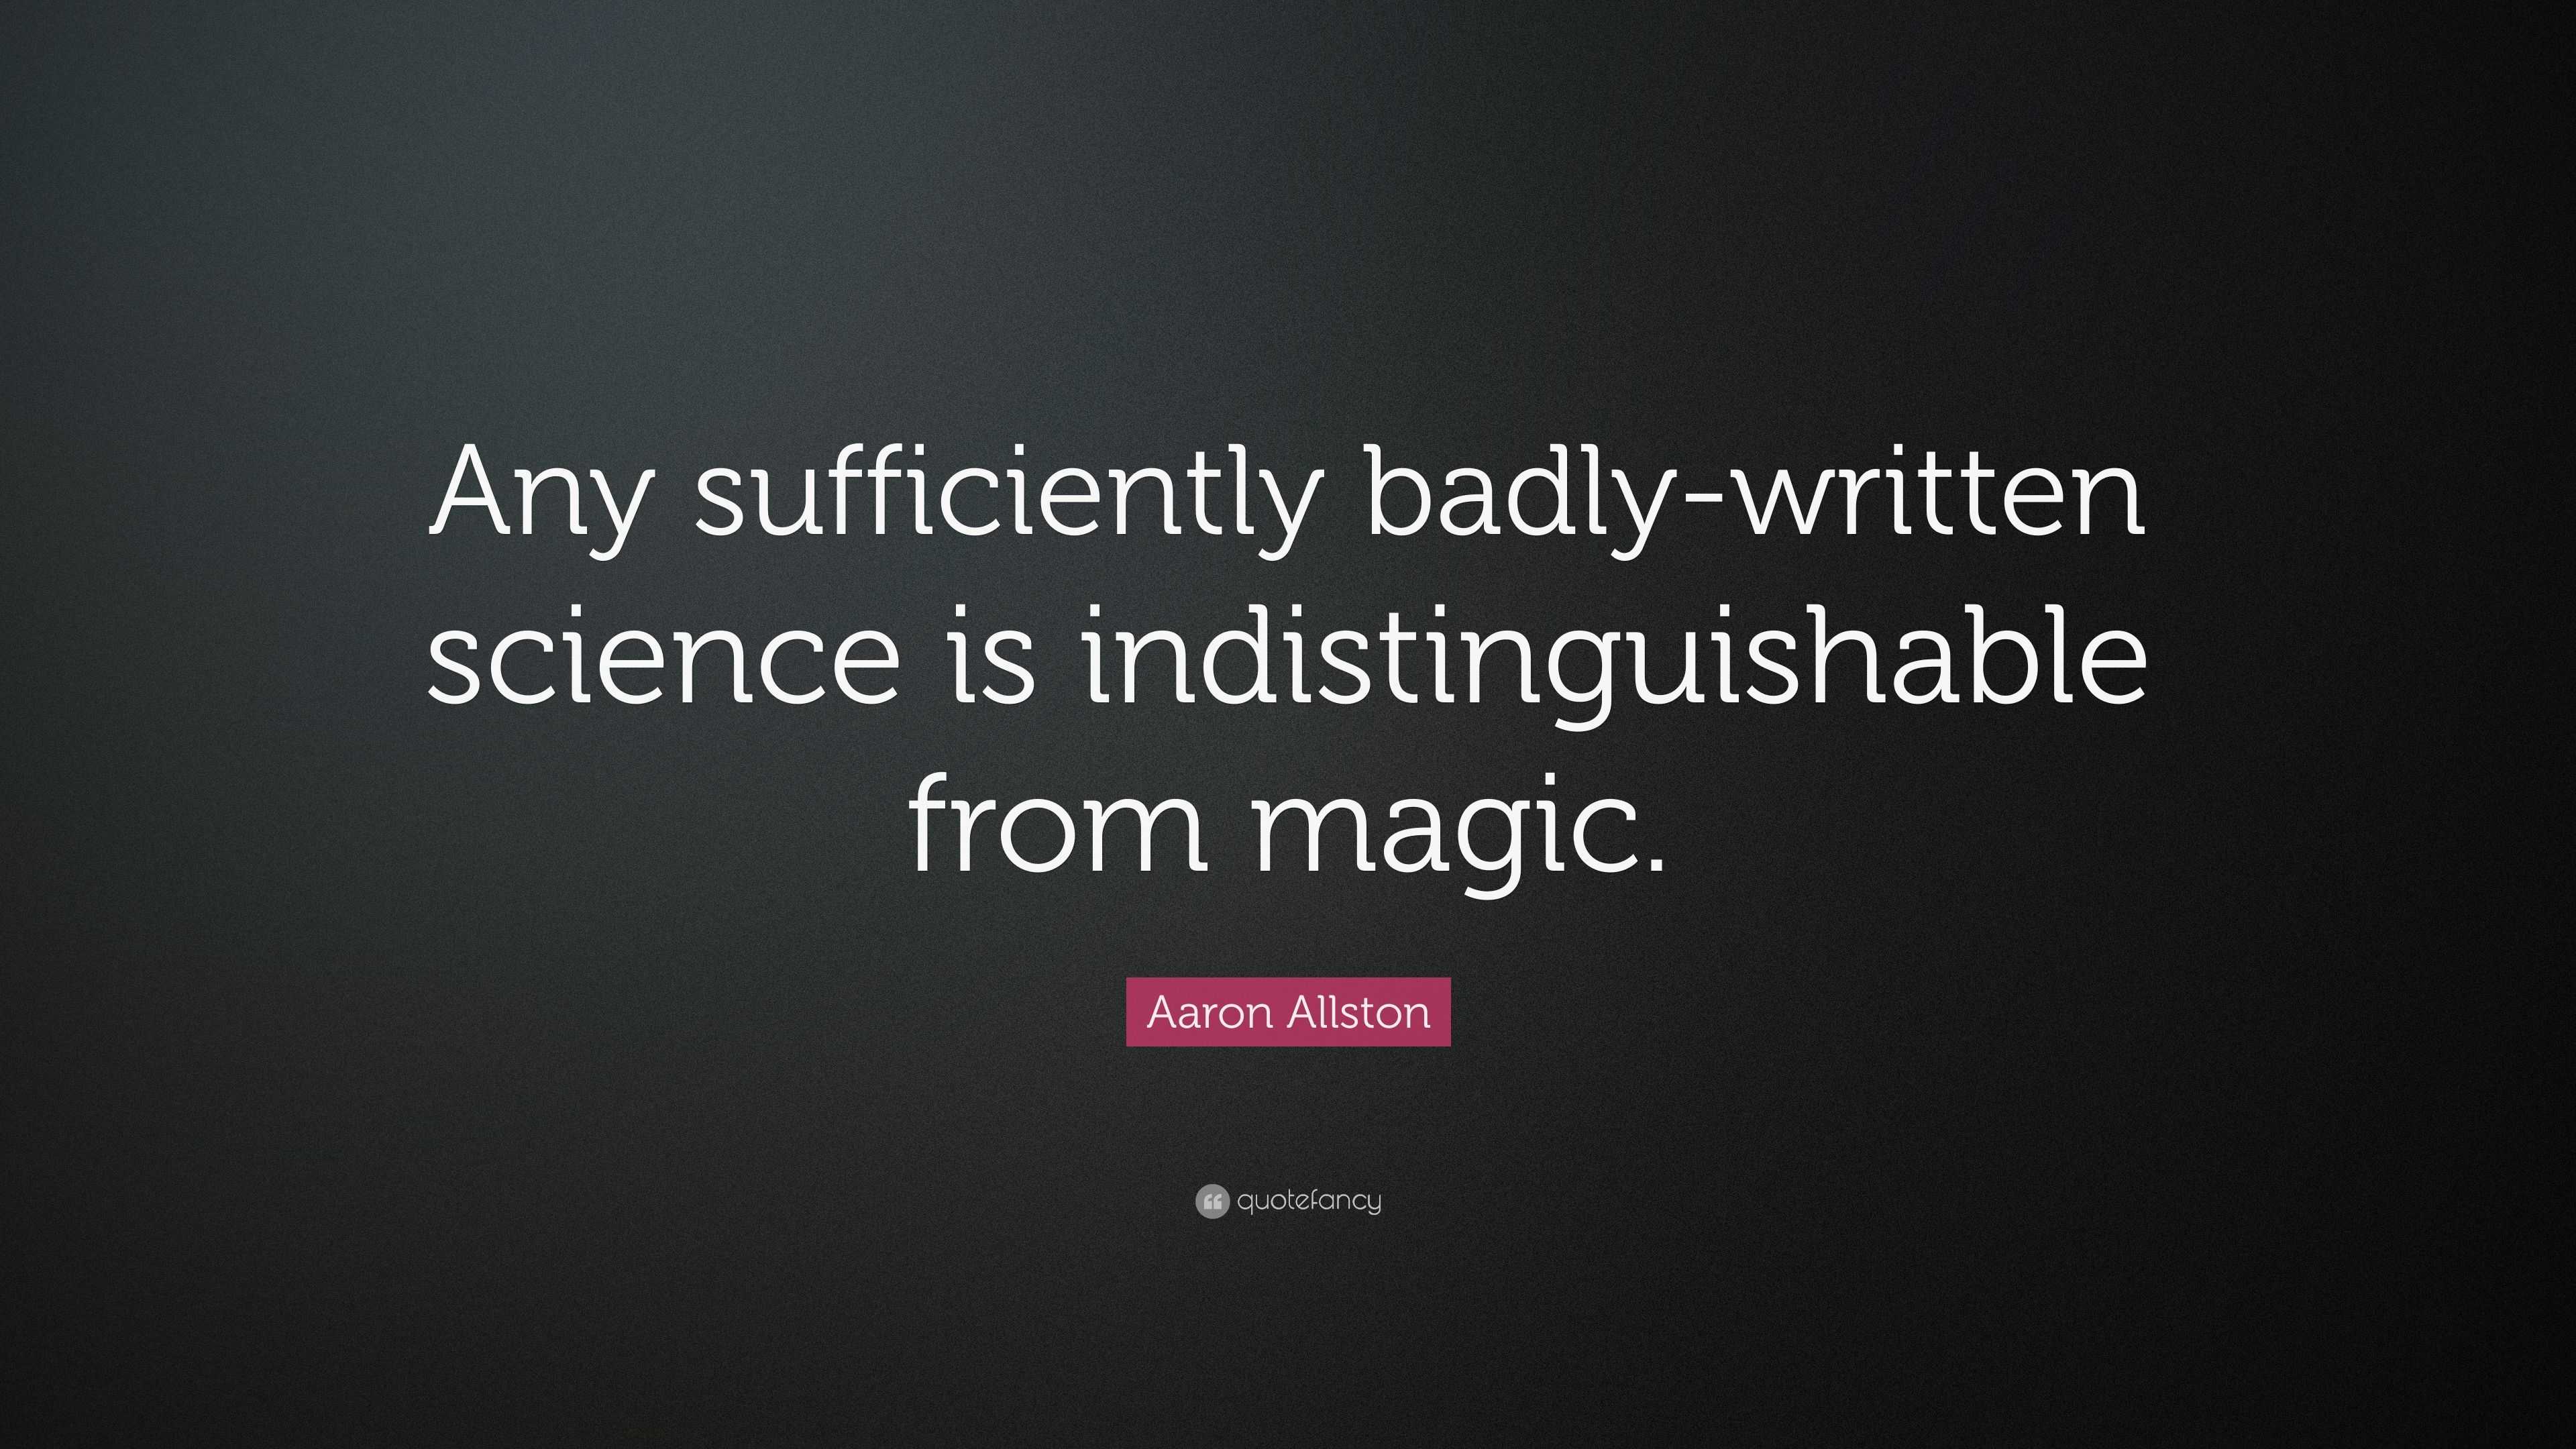 Aaron Allston Quote: “Any sufficiently badly-written science is ...